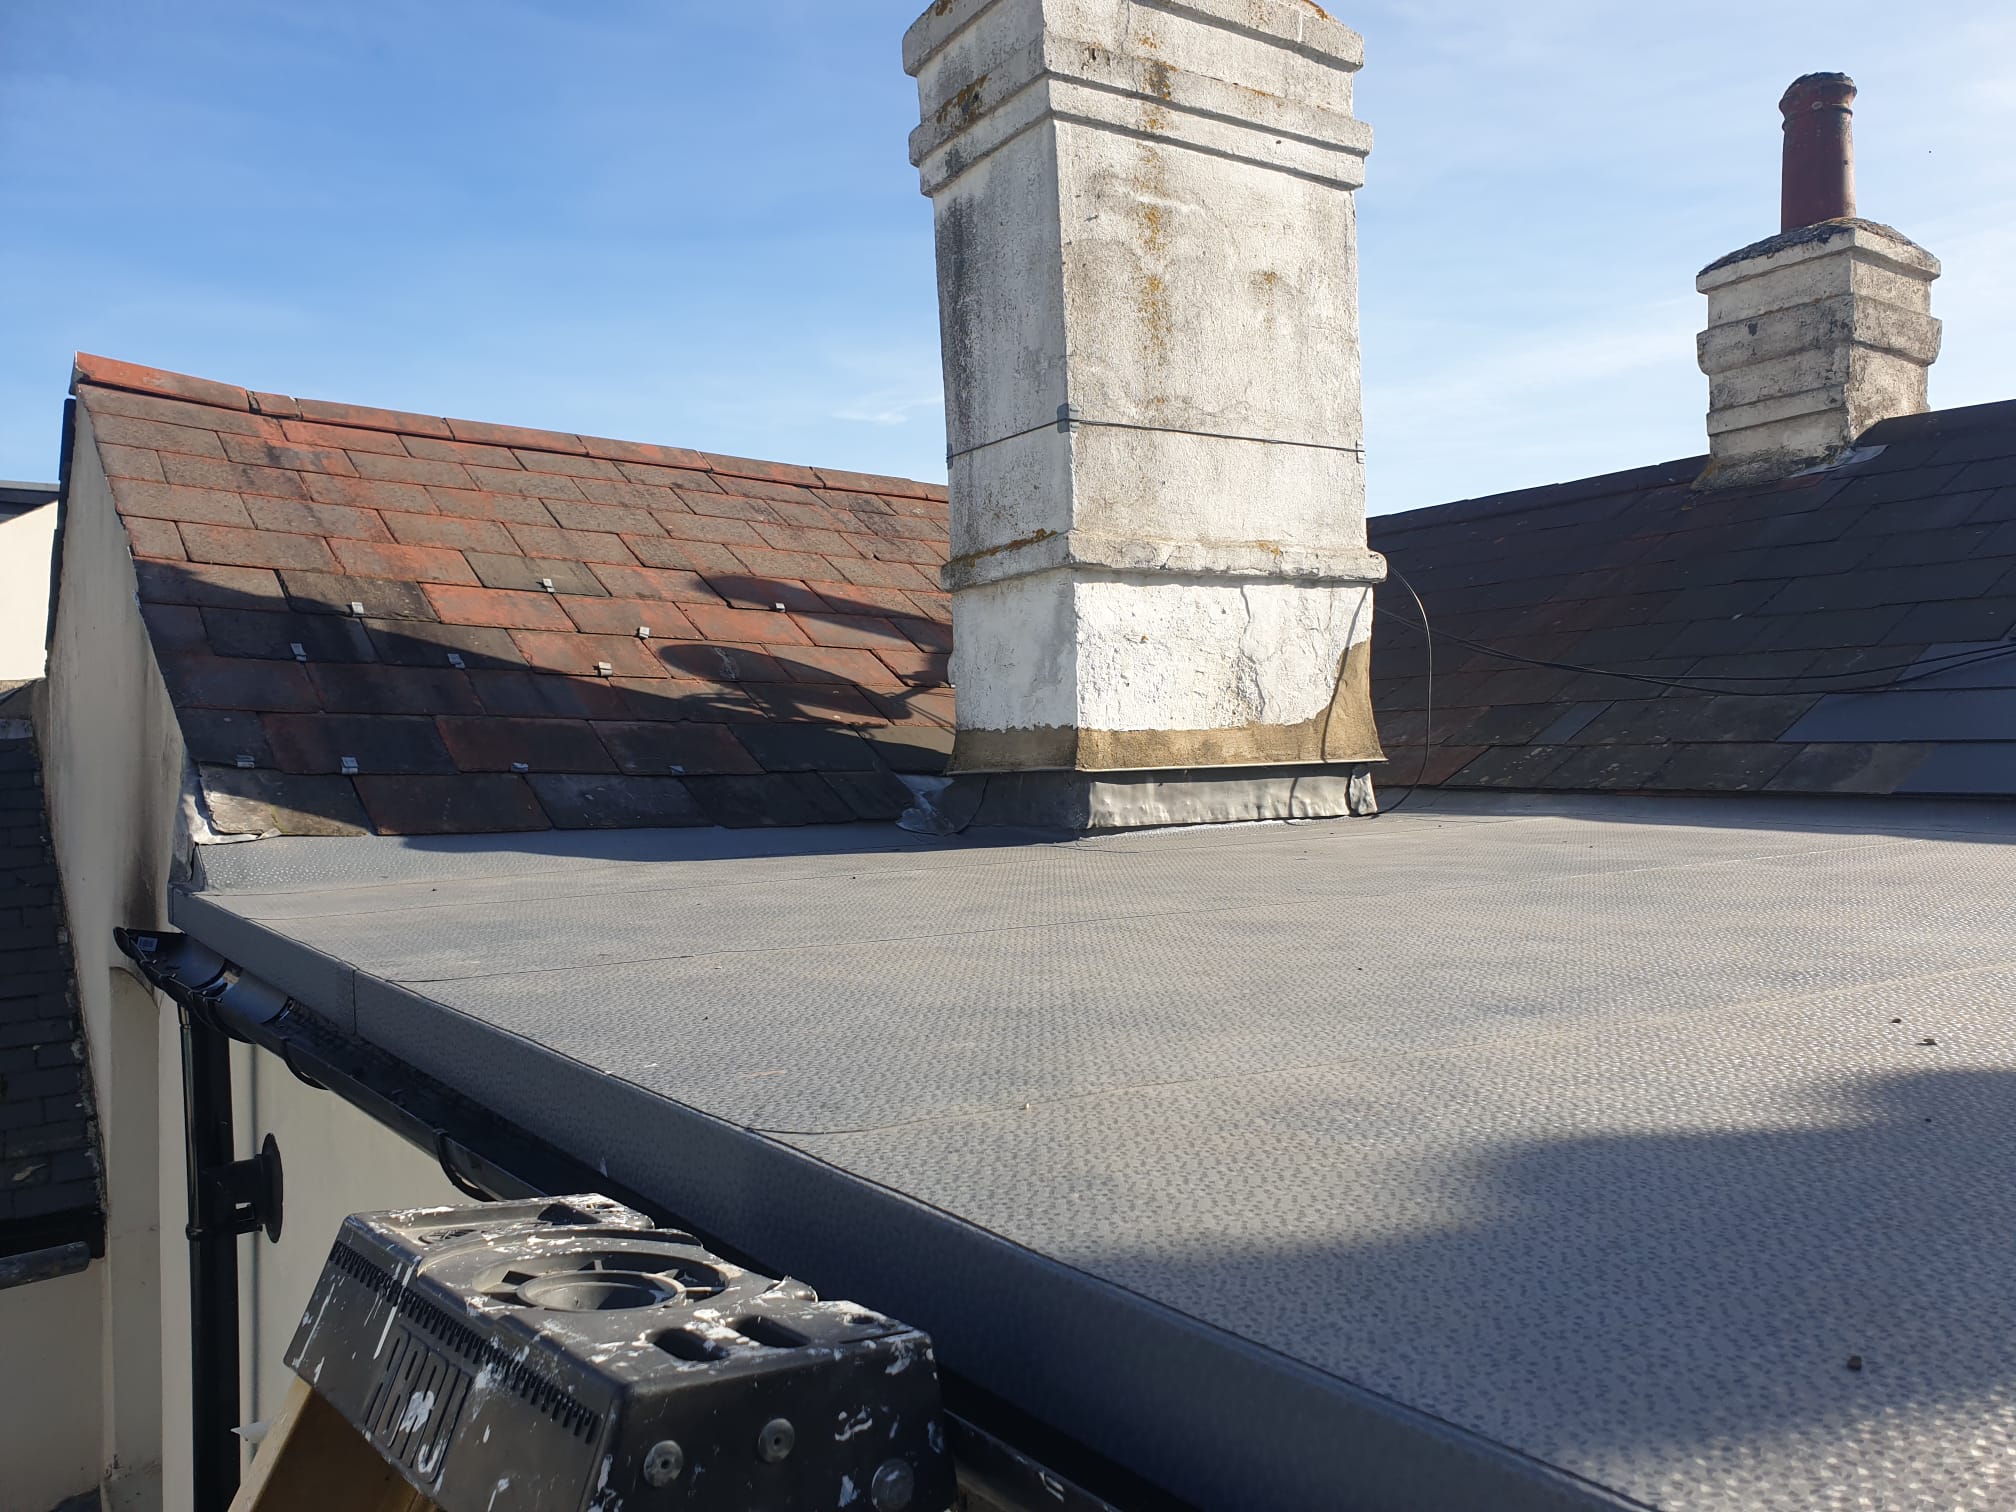 How do you maintain a flat roof?